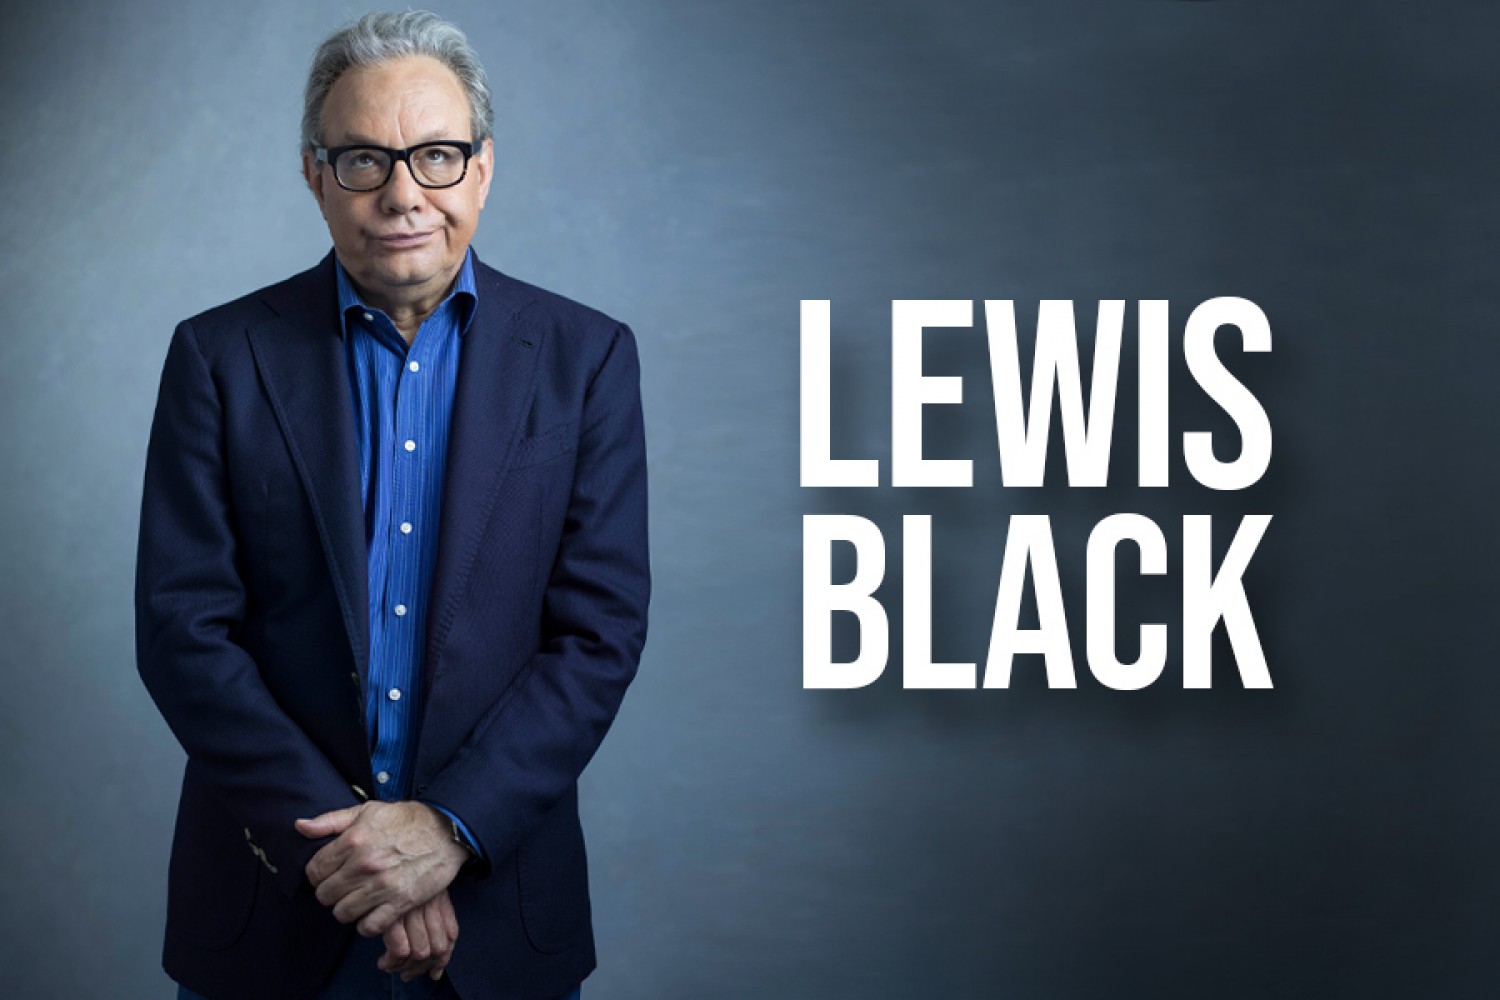 Lewis Niles Black is an American, author, comedian, social critic, and actor. Black hosted the Comedy Central series ‘Lewis Black’s Root of All Evil’. He is also known for his ‘Back in Black’ commentary segment. 